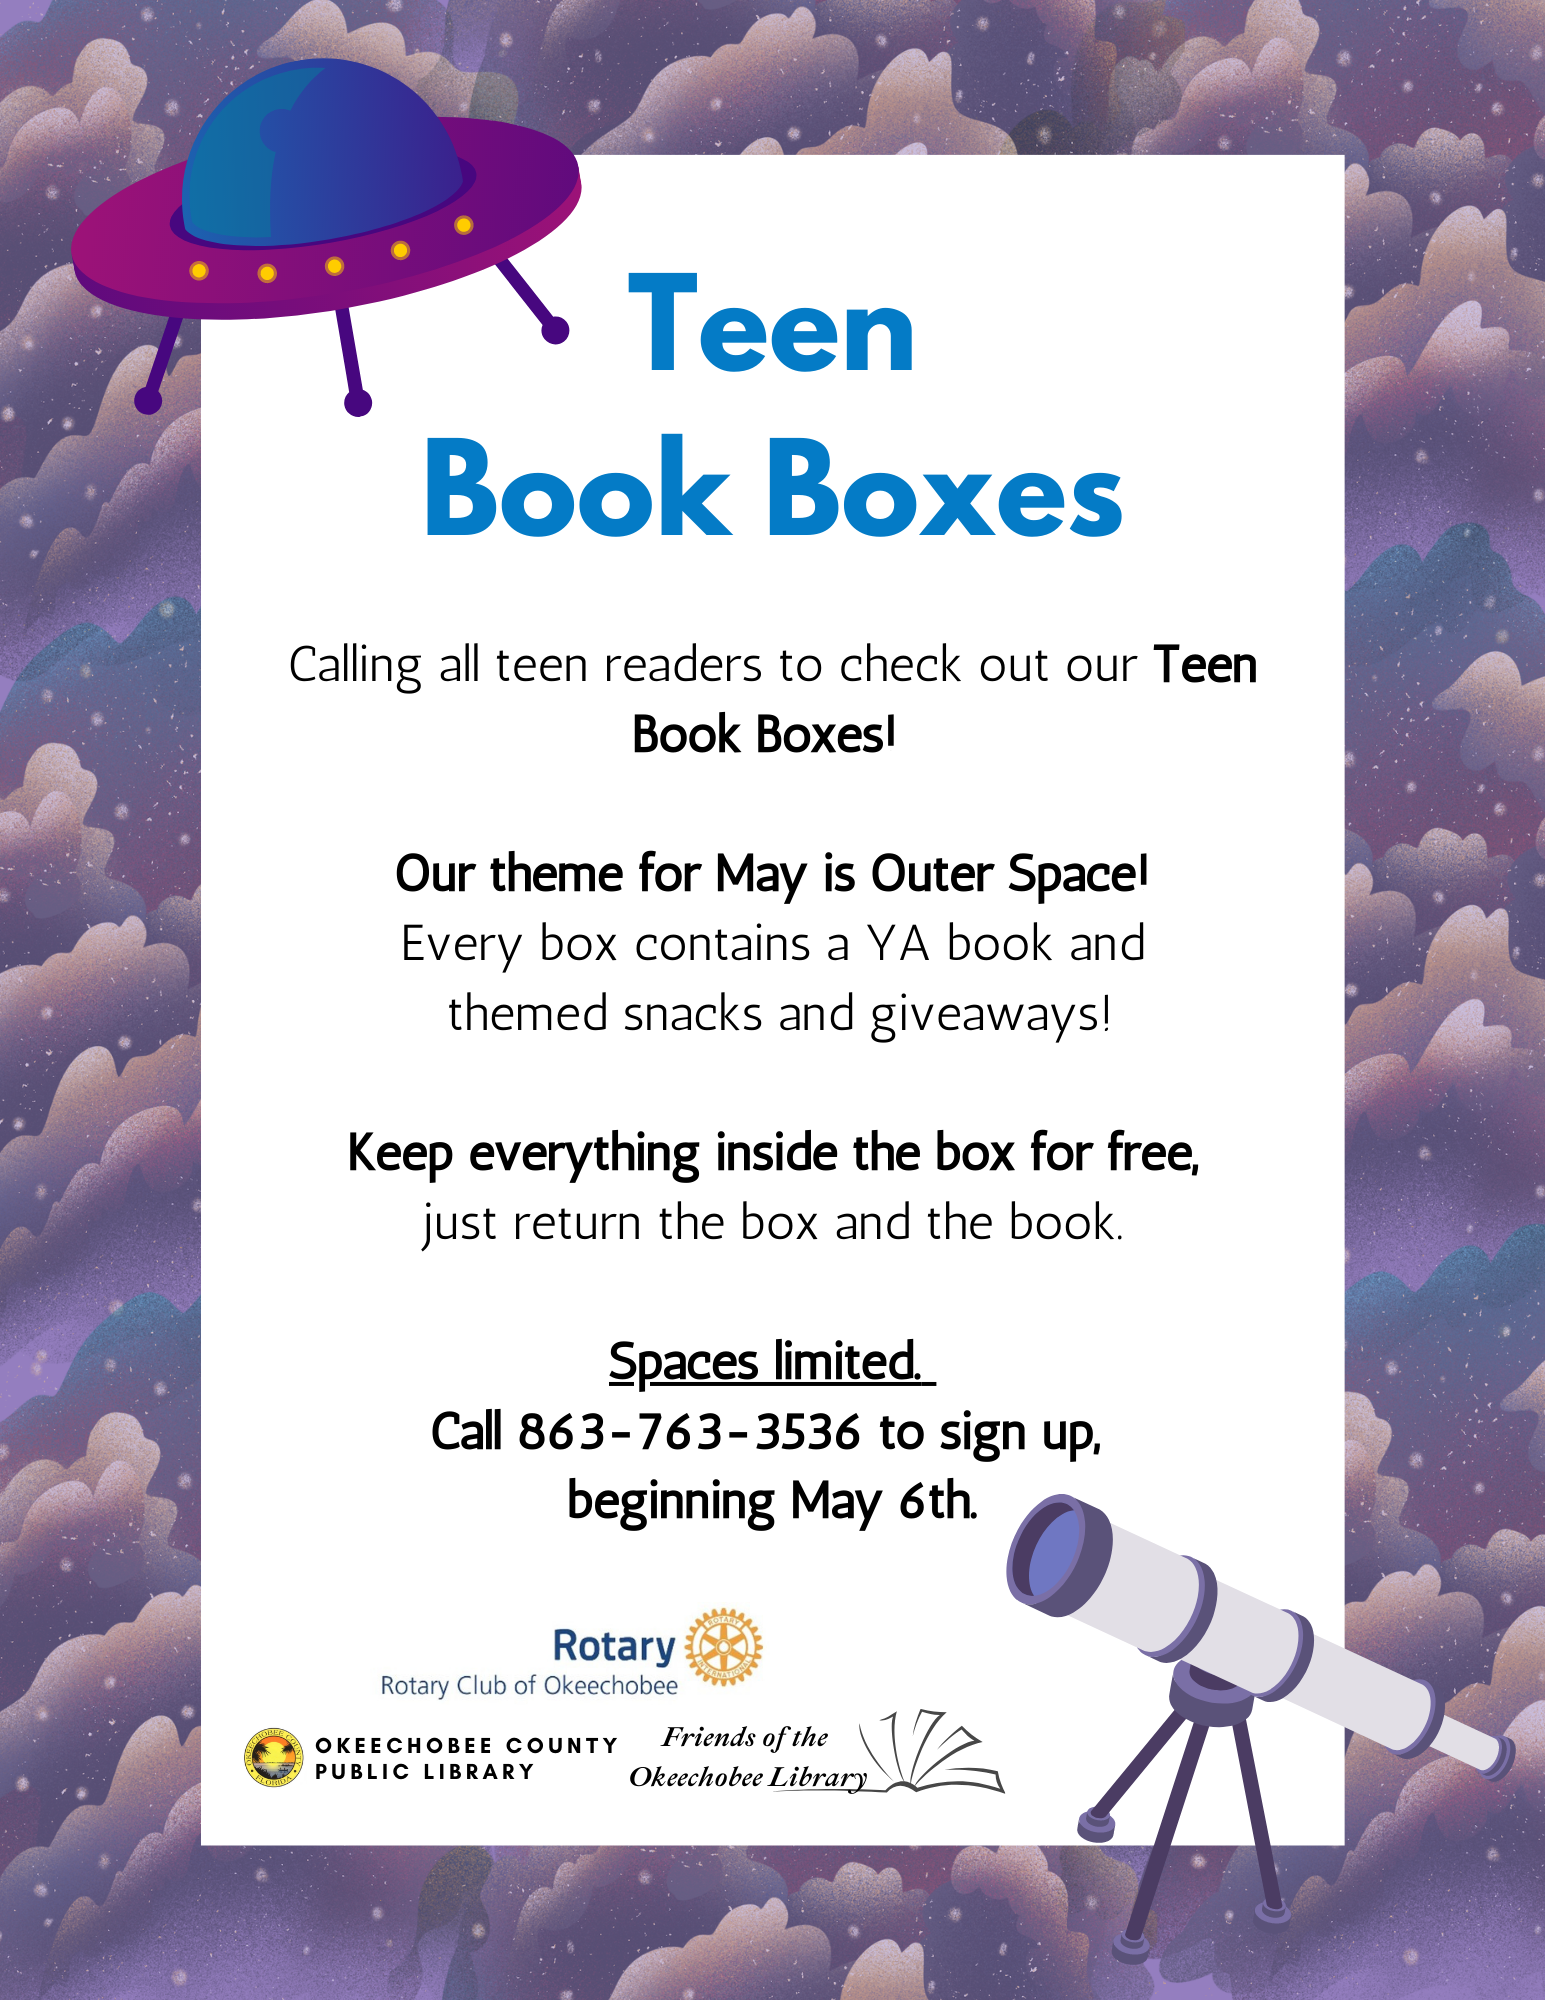 May Teen Book Boxes! Open to all teens, get free prizes and snacks just for checking out a book!